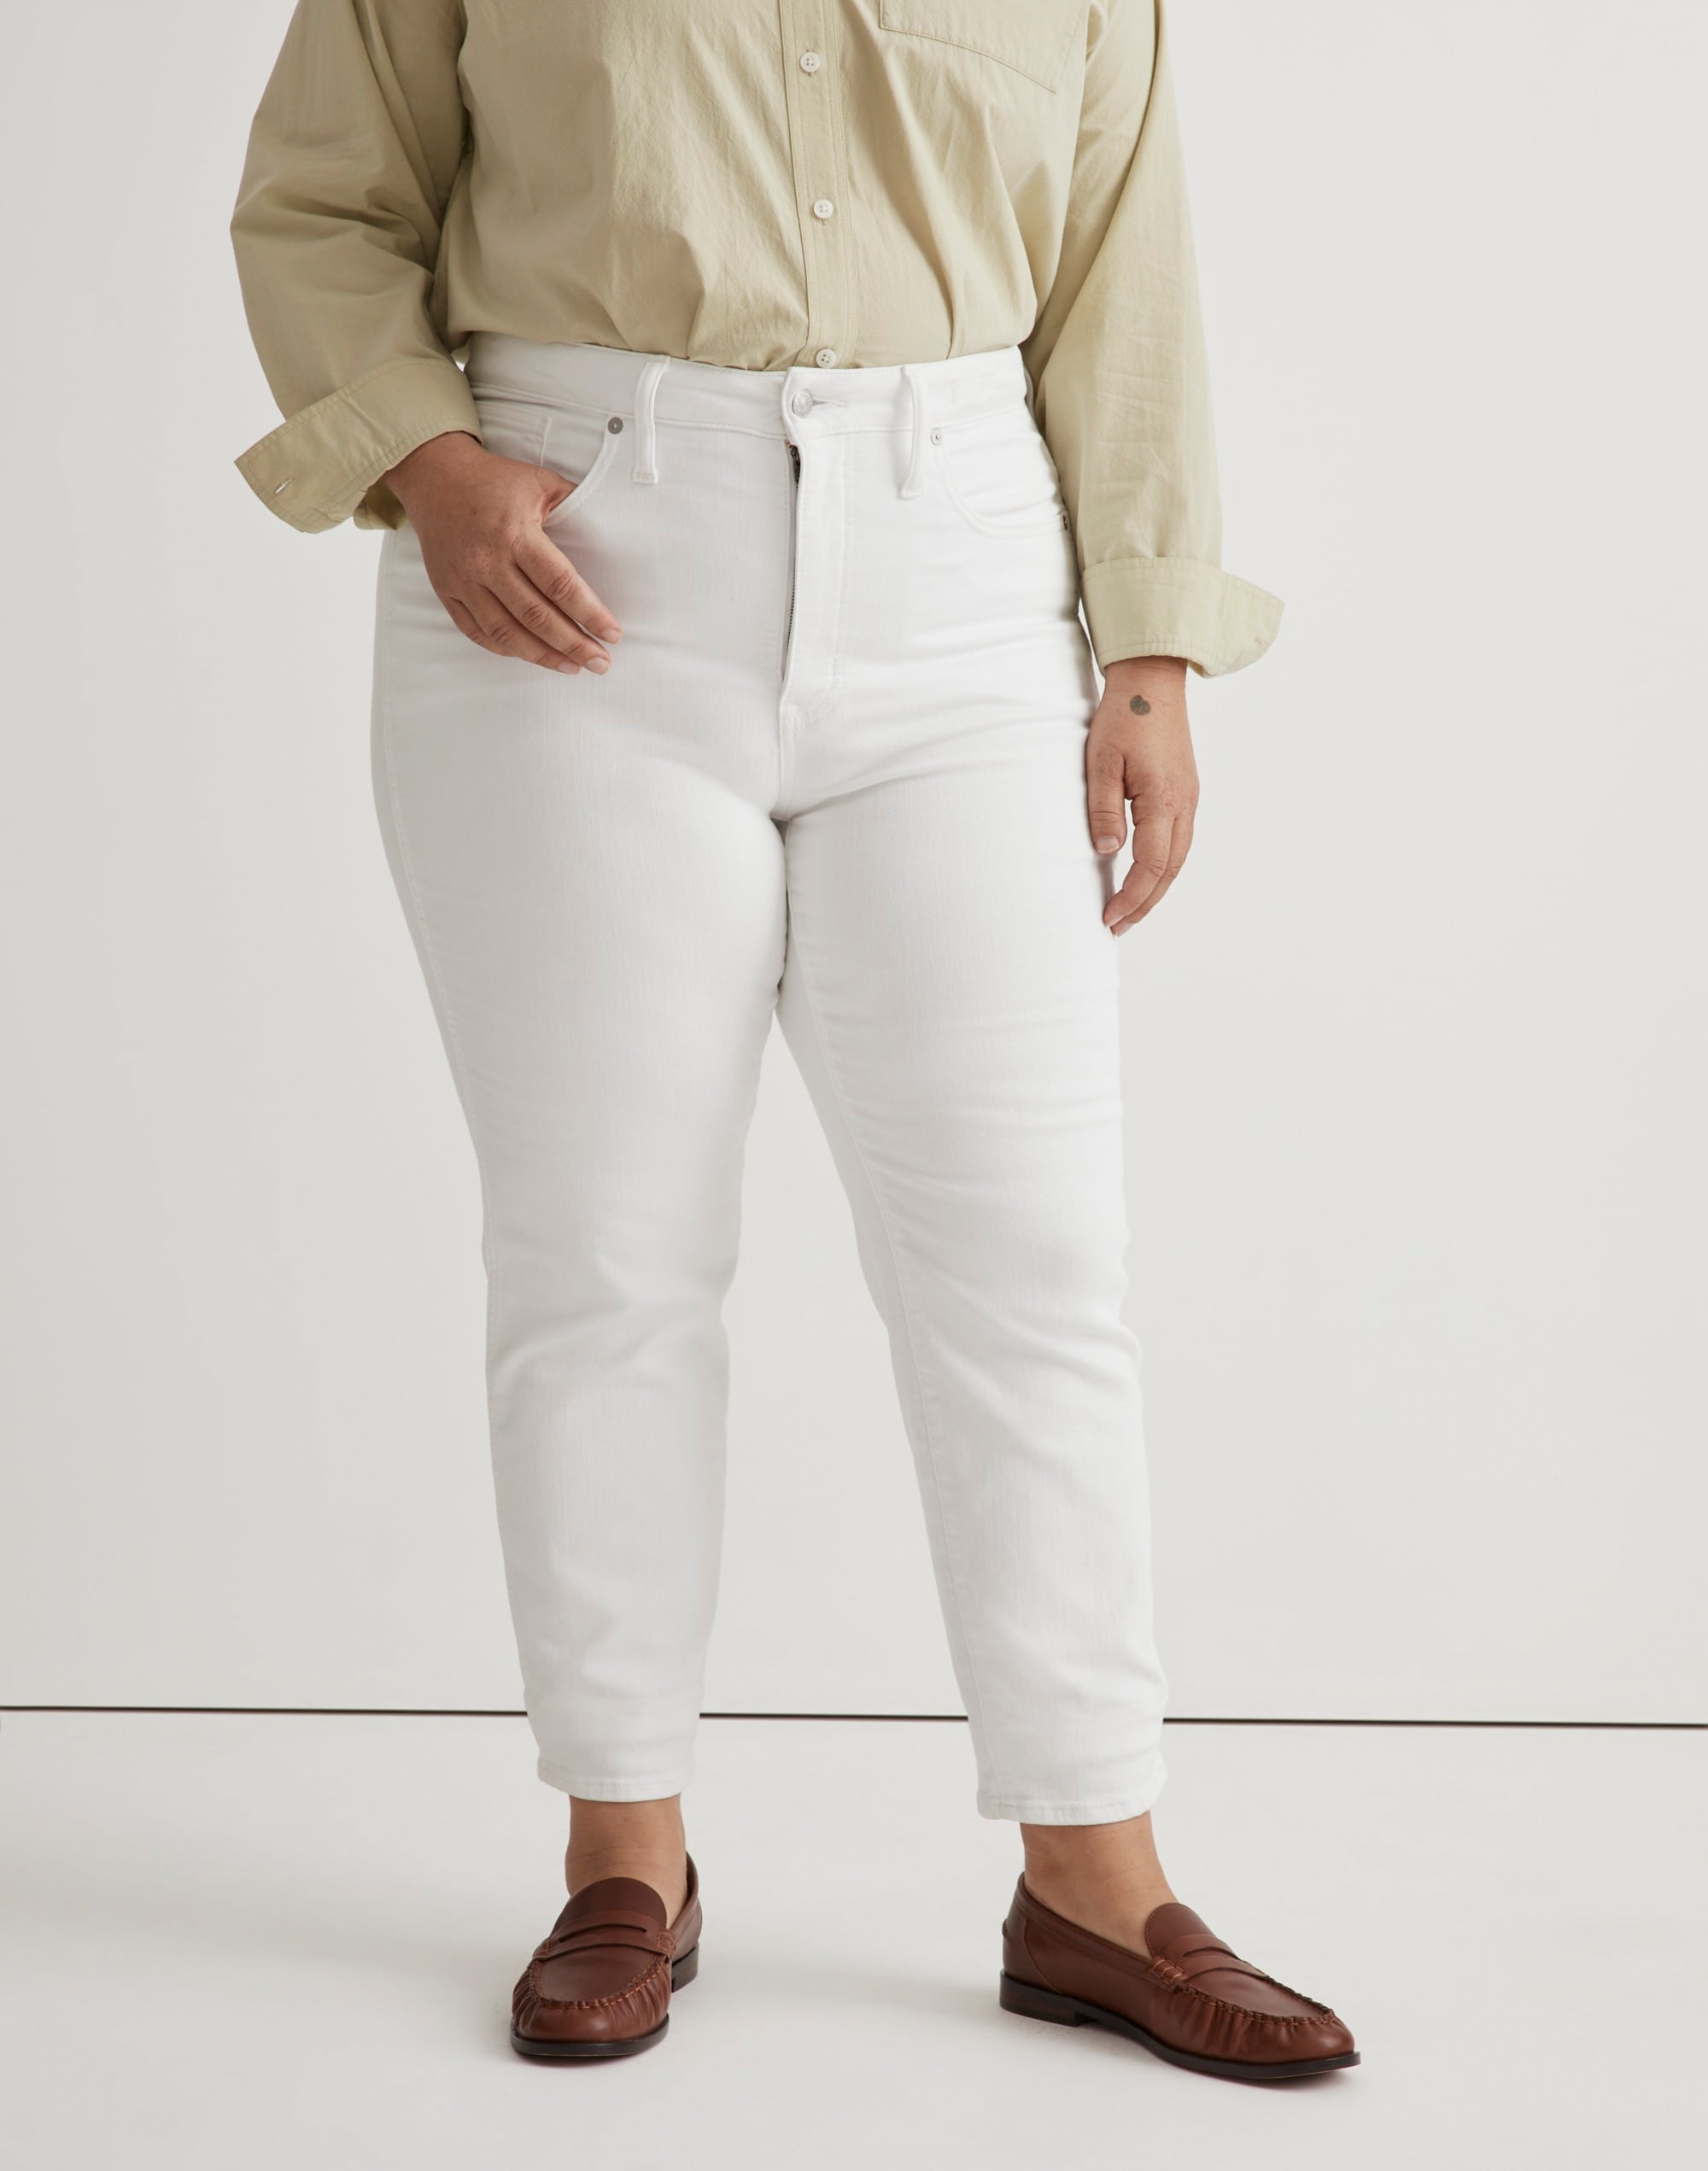 Plus Stovepipe Jeans Pure White